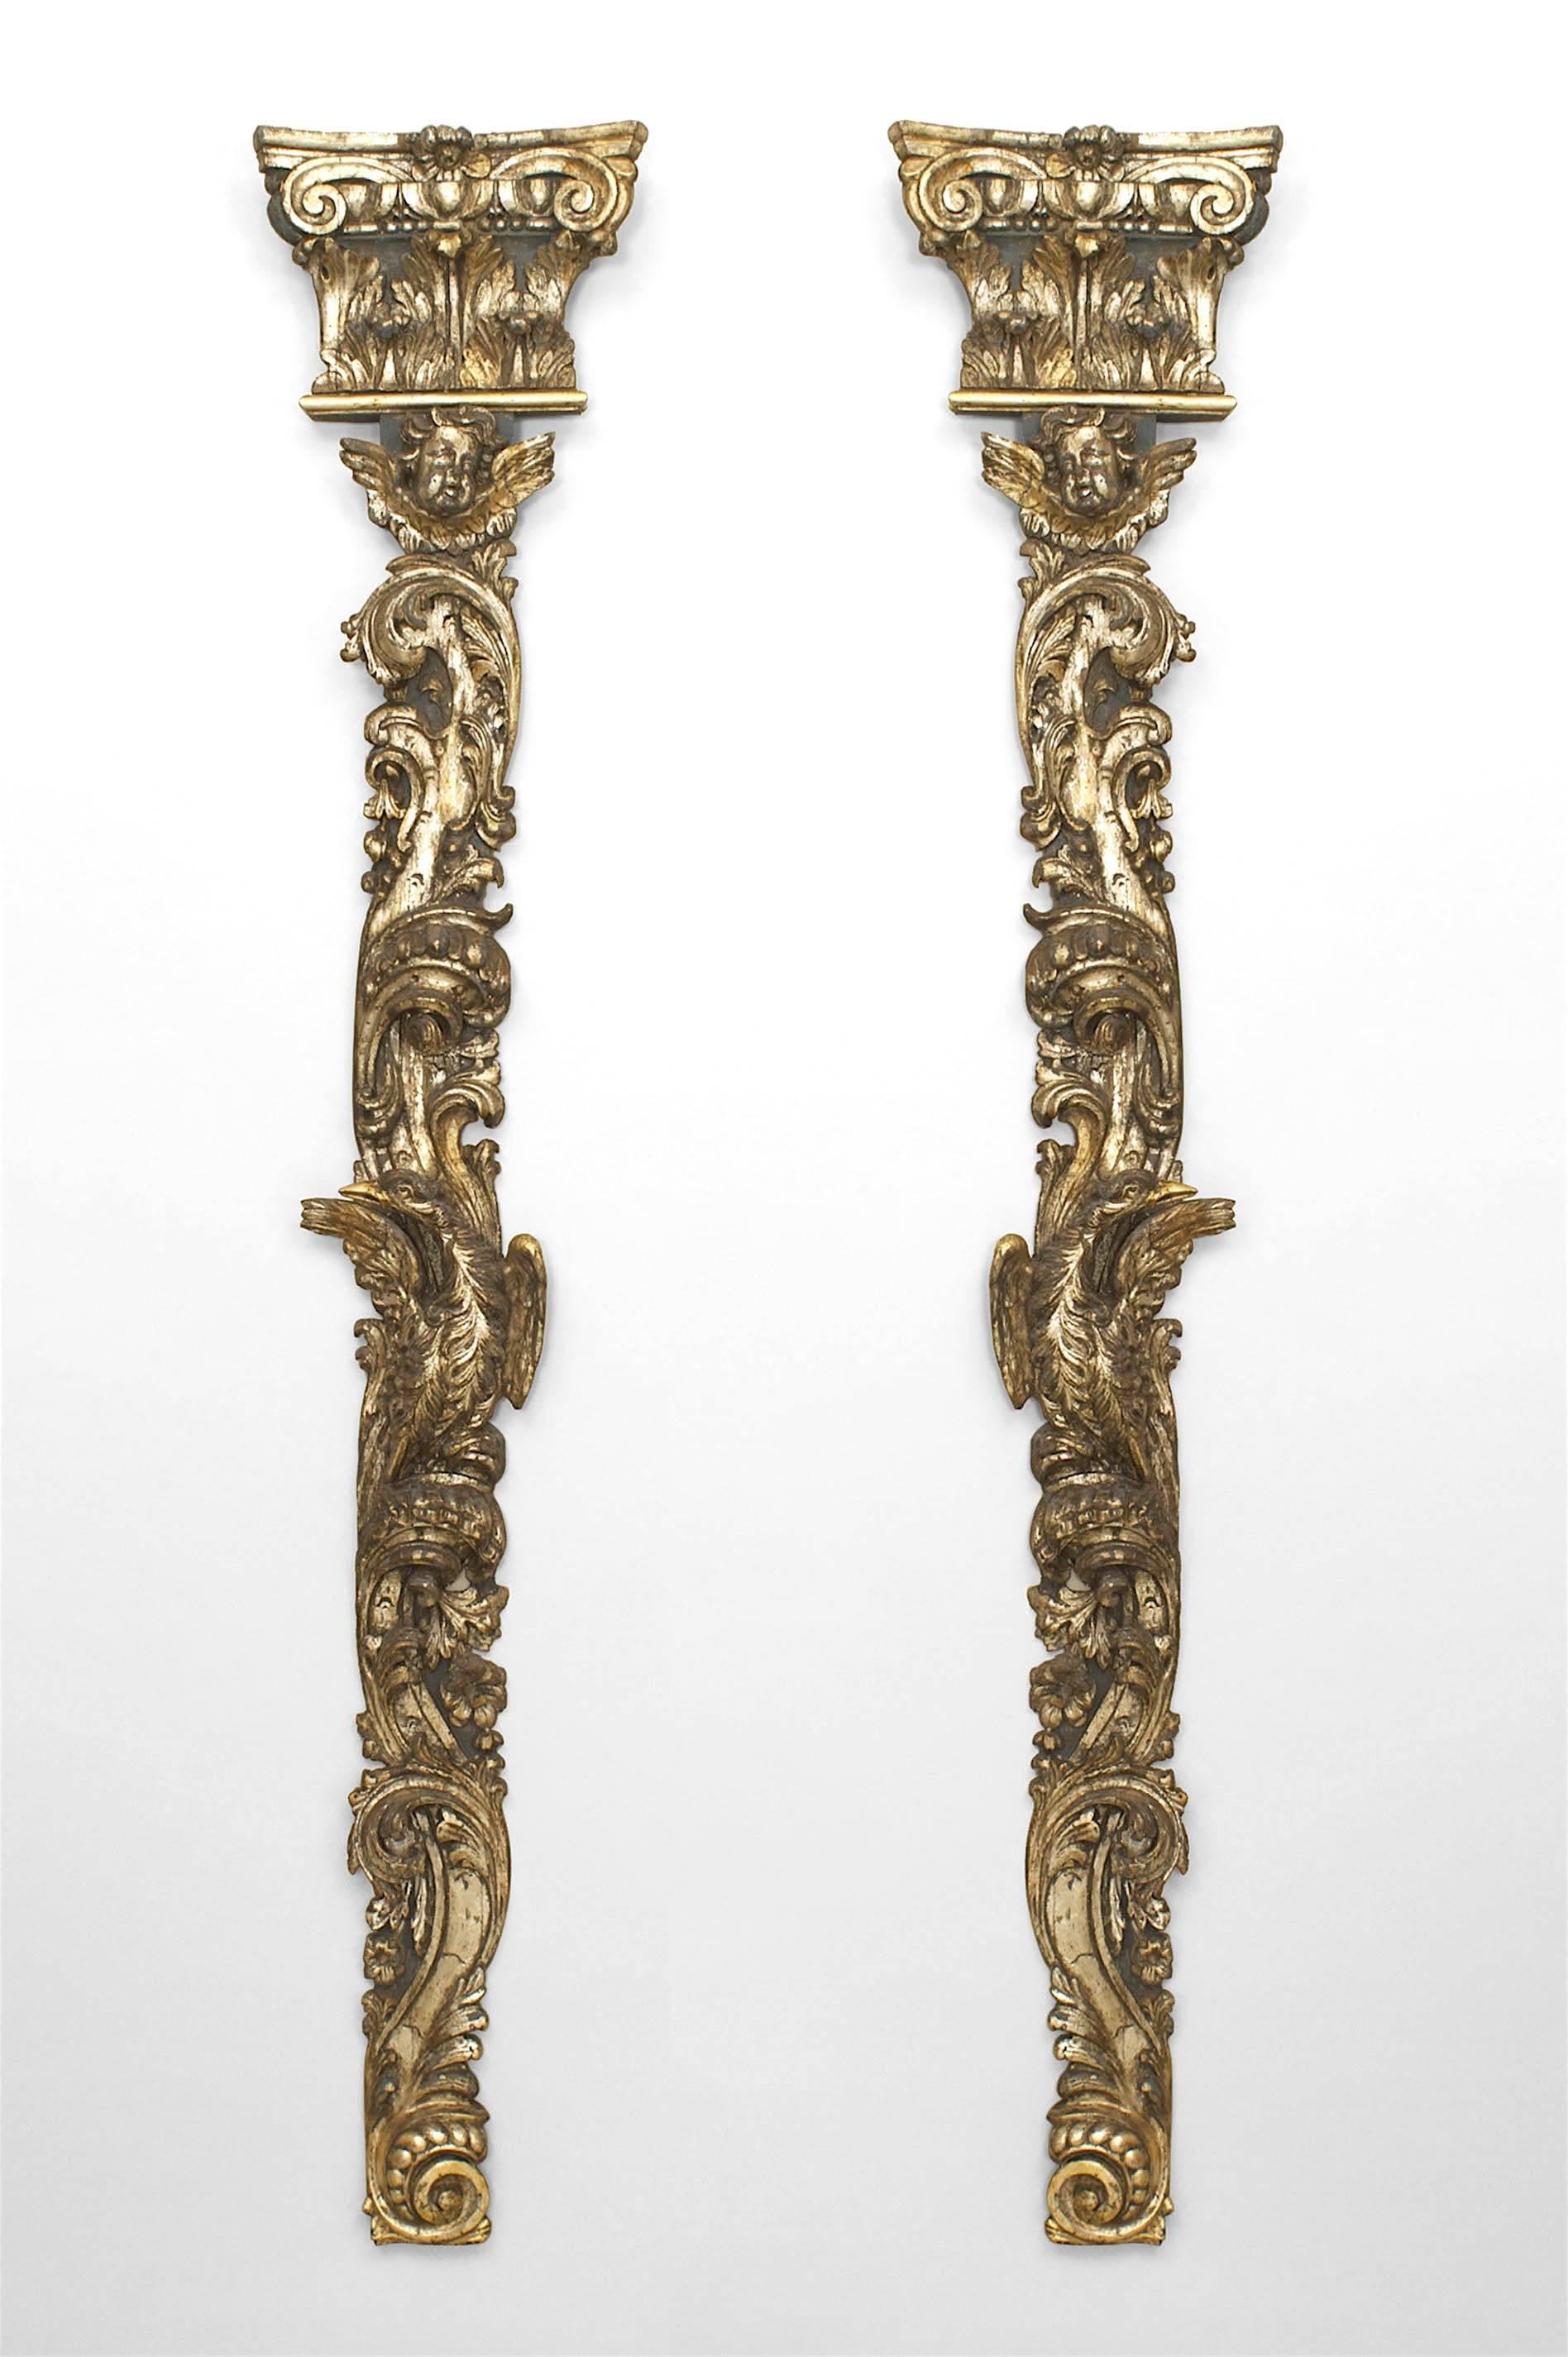 Pair of Italian Rococo (mid-18th Cent) carved silver gilt pilaster wall plaques with bird and floral carving under an Ionic capital pediment